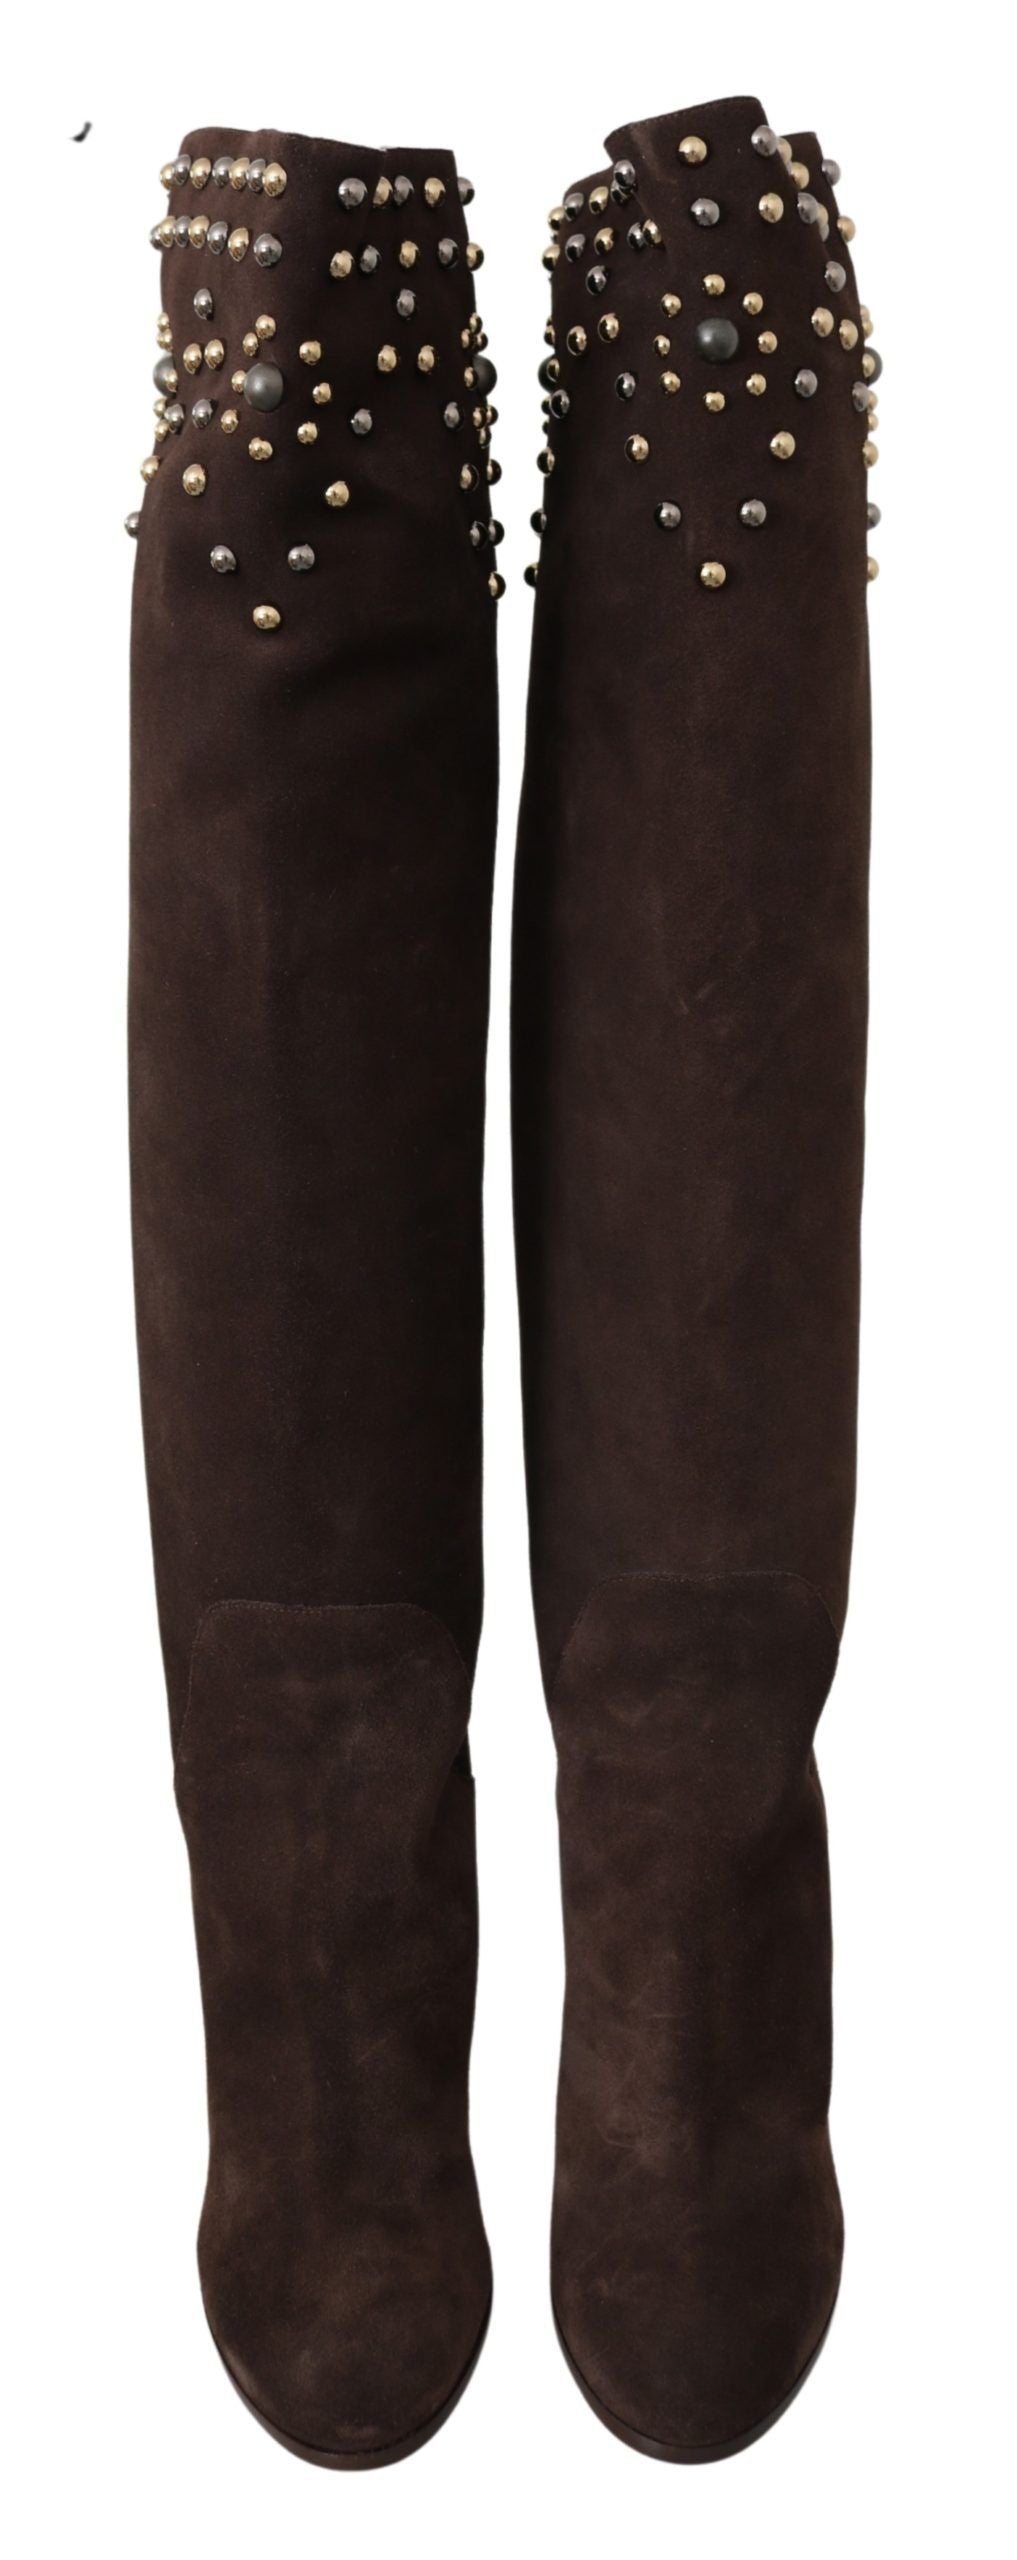 Brown Suede Studded Knee High Shoes Boots - Designed by Dolce & Gabbana Available to Buy at a Discounted Price on Moon Behind The Hill Online Designer Discount Store